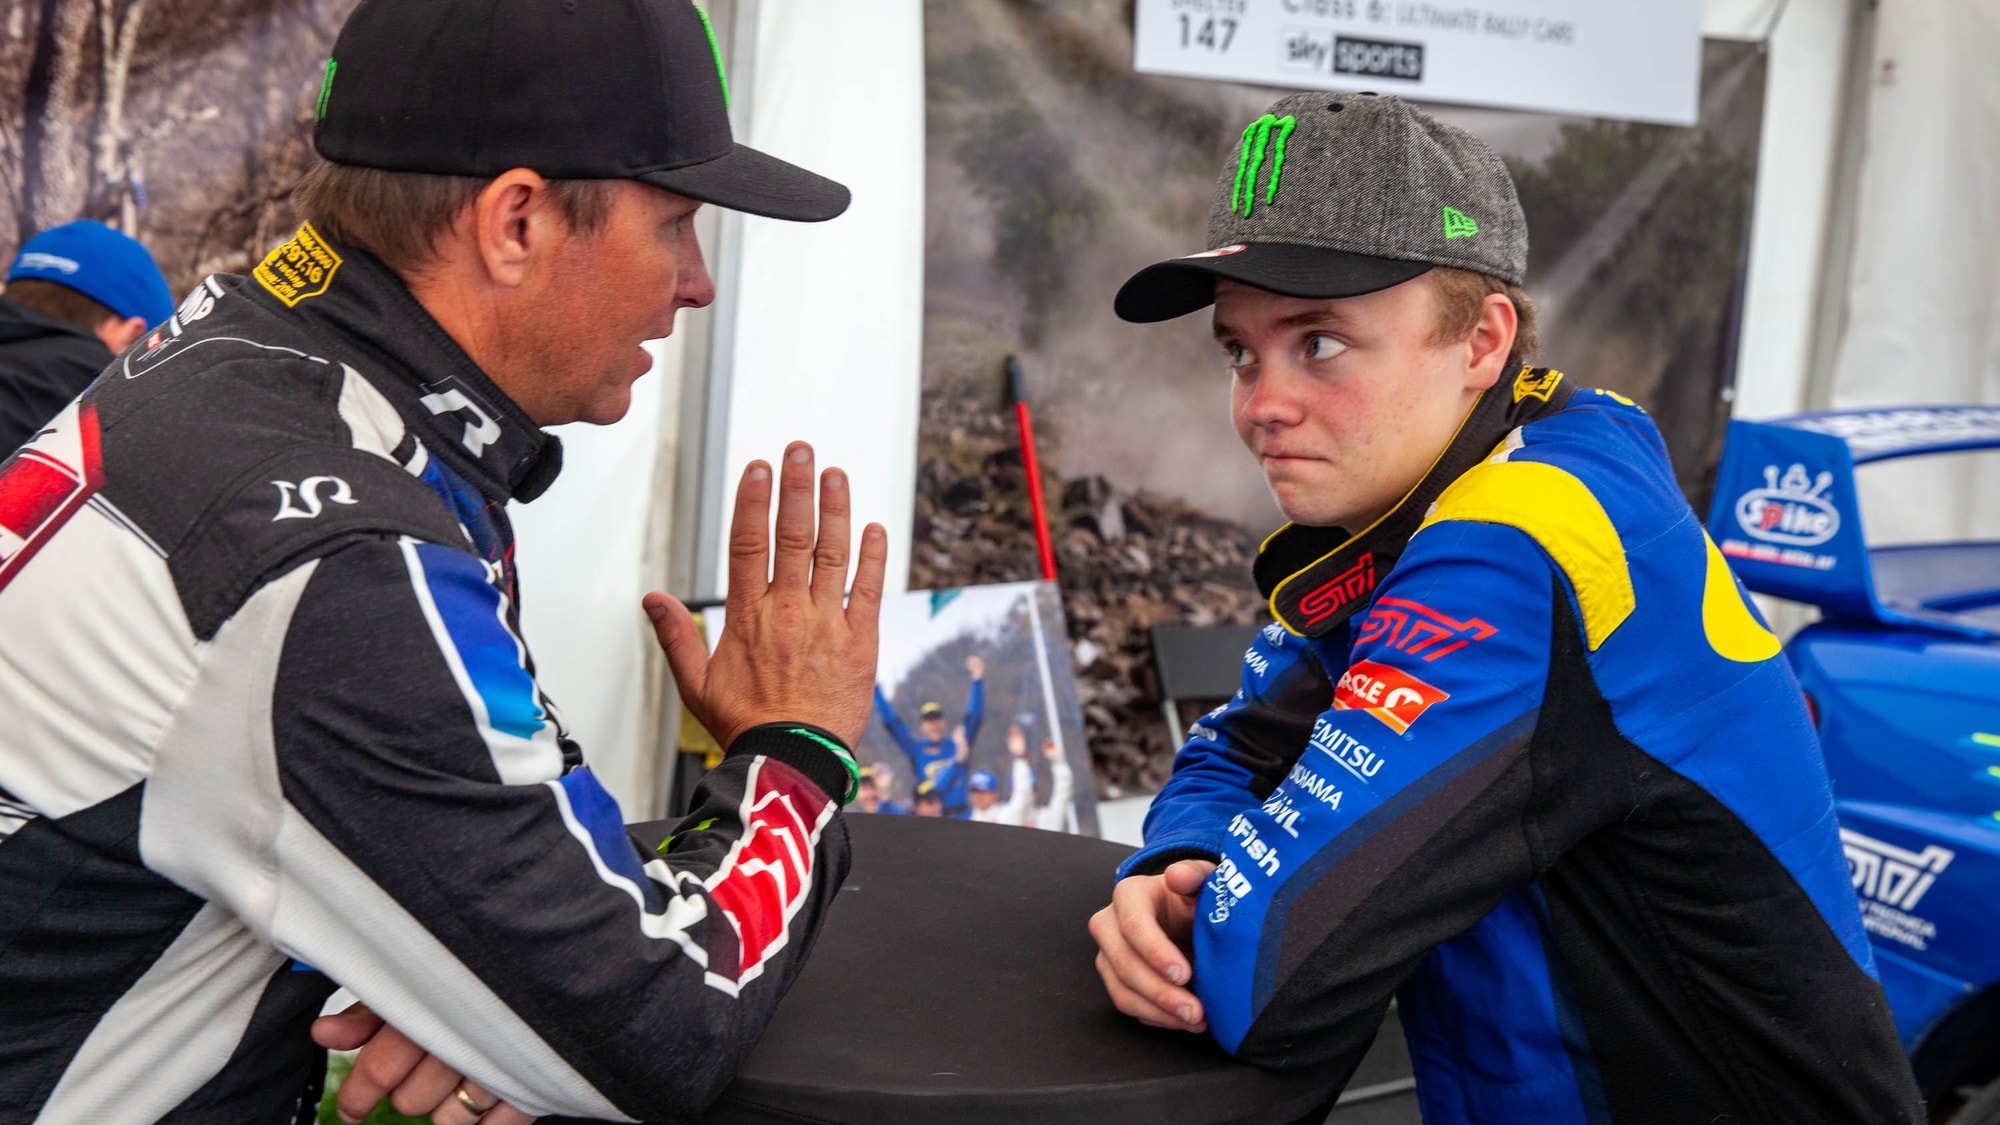 Petter and Oliver Solberg